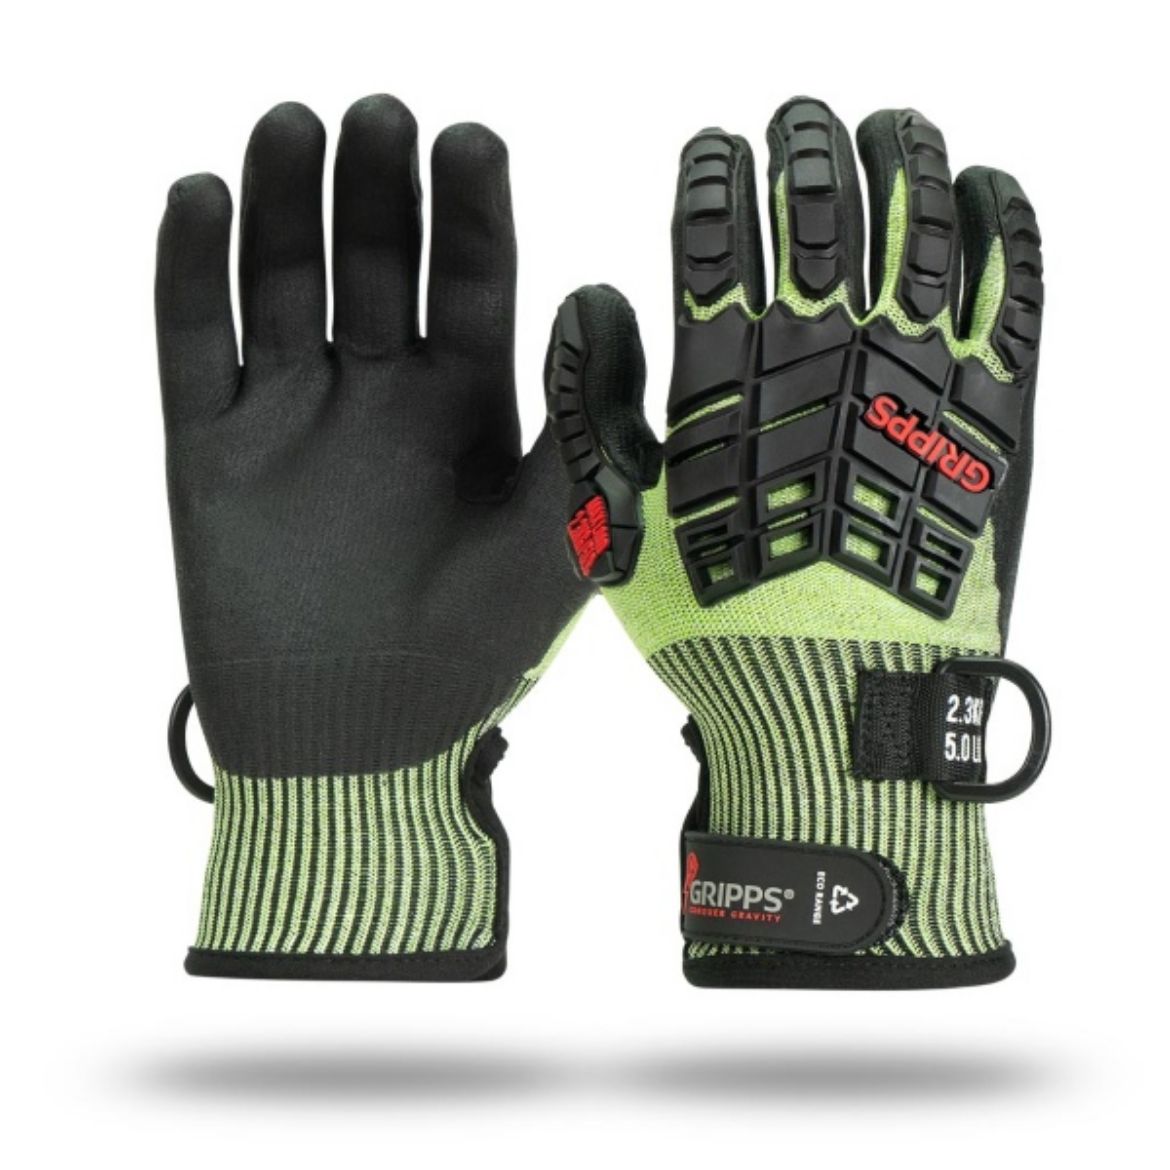 Picture of C5 ECO IMPACT GLOVE. AVAILABLE IN SIZES - S, M, L, XL, 2XL